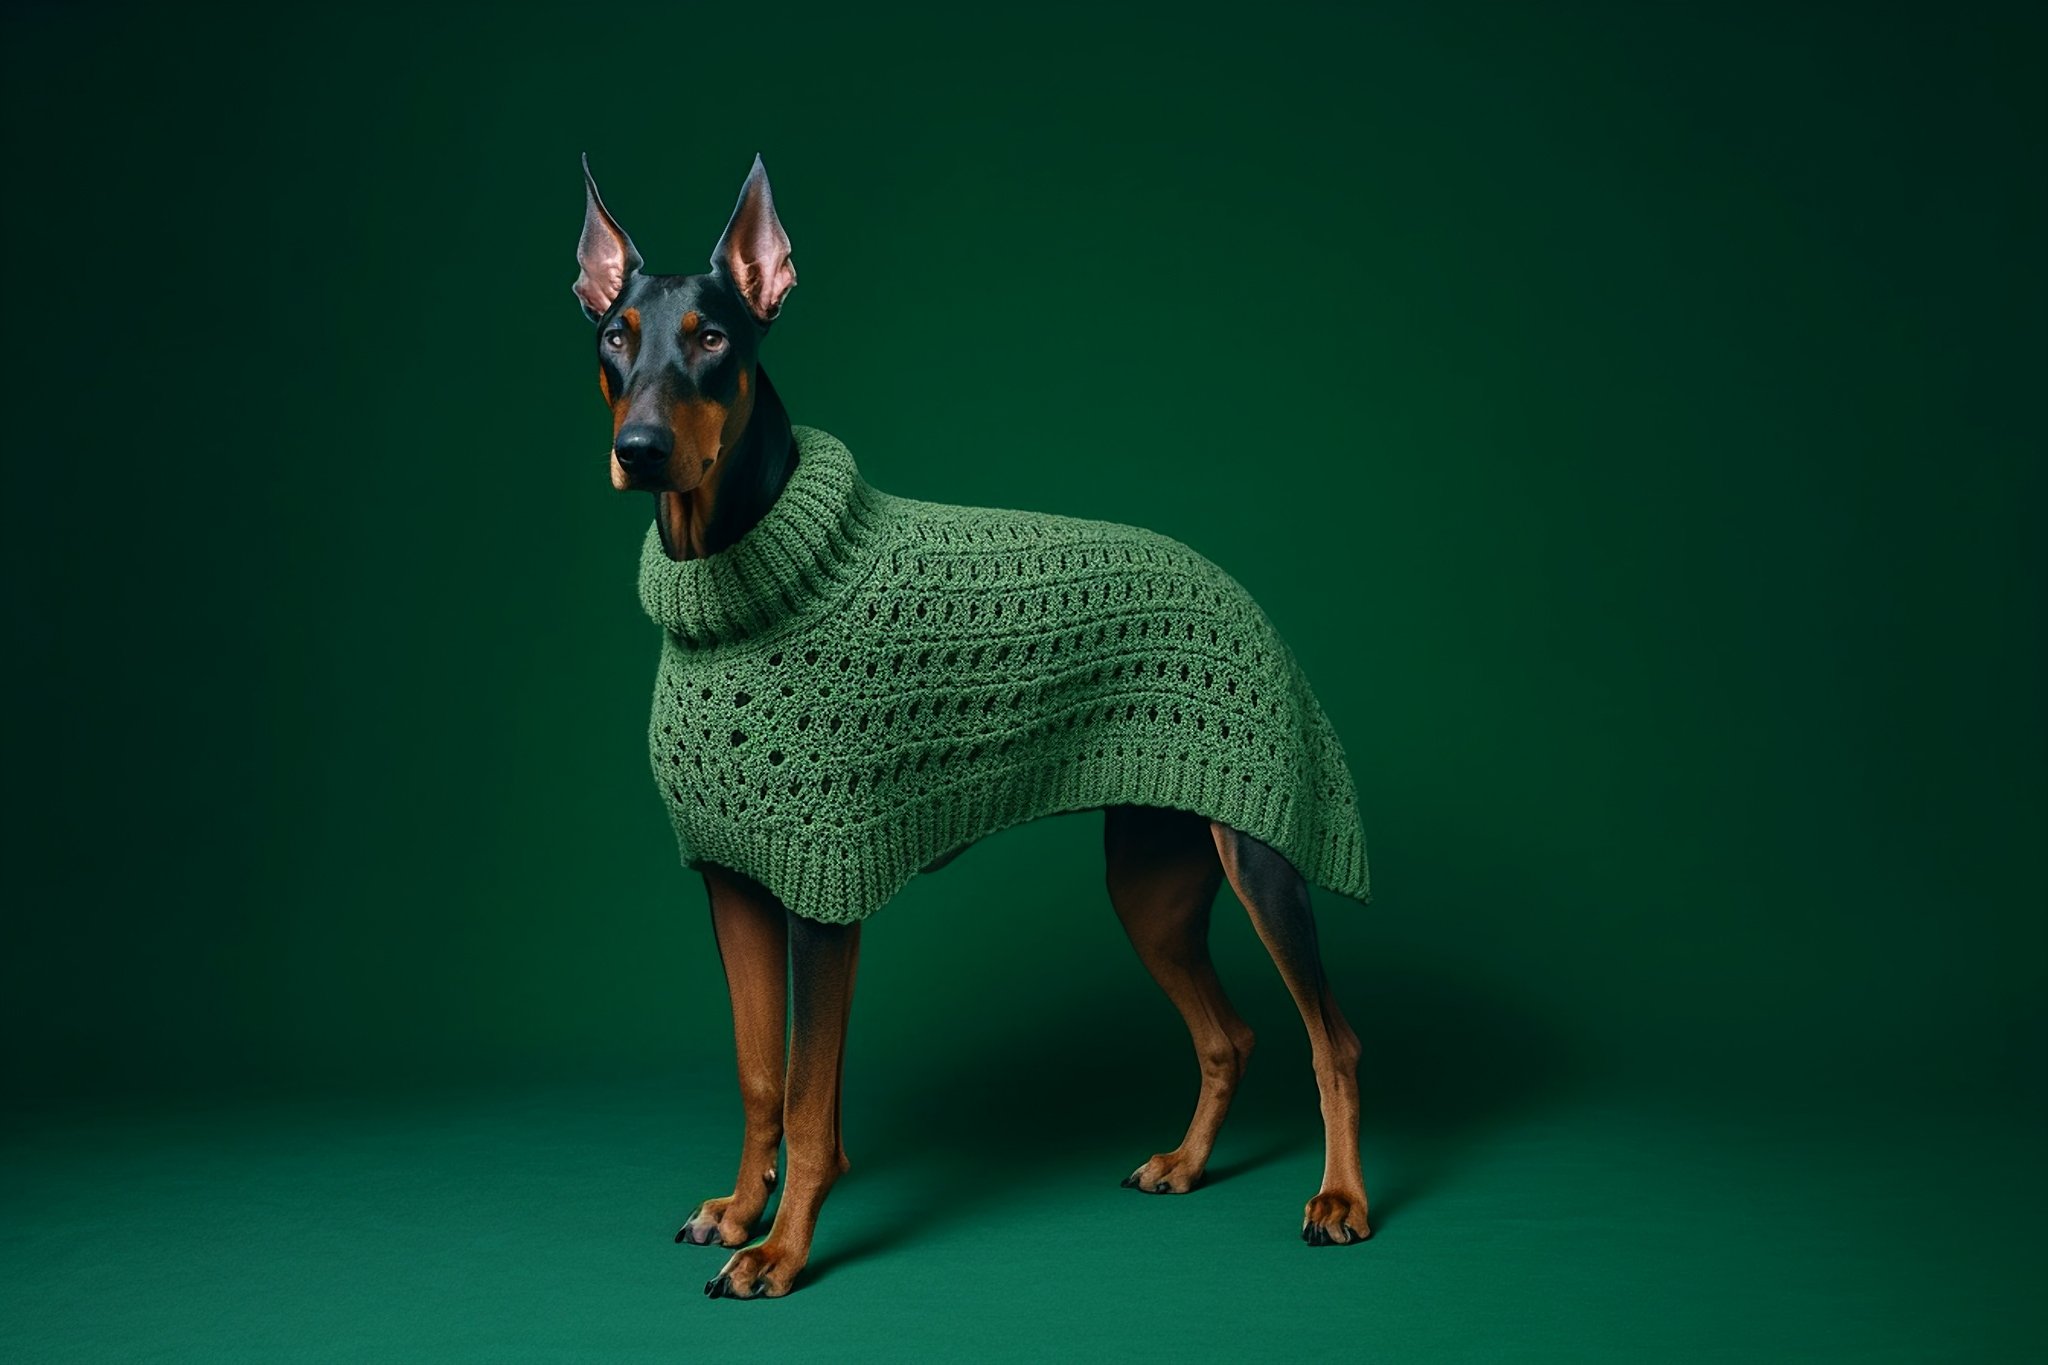 20230516_S_Andersson_Dogs_in_sweaters00004.jpg